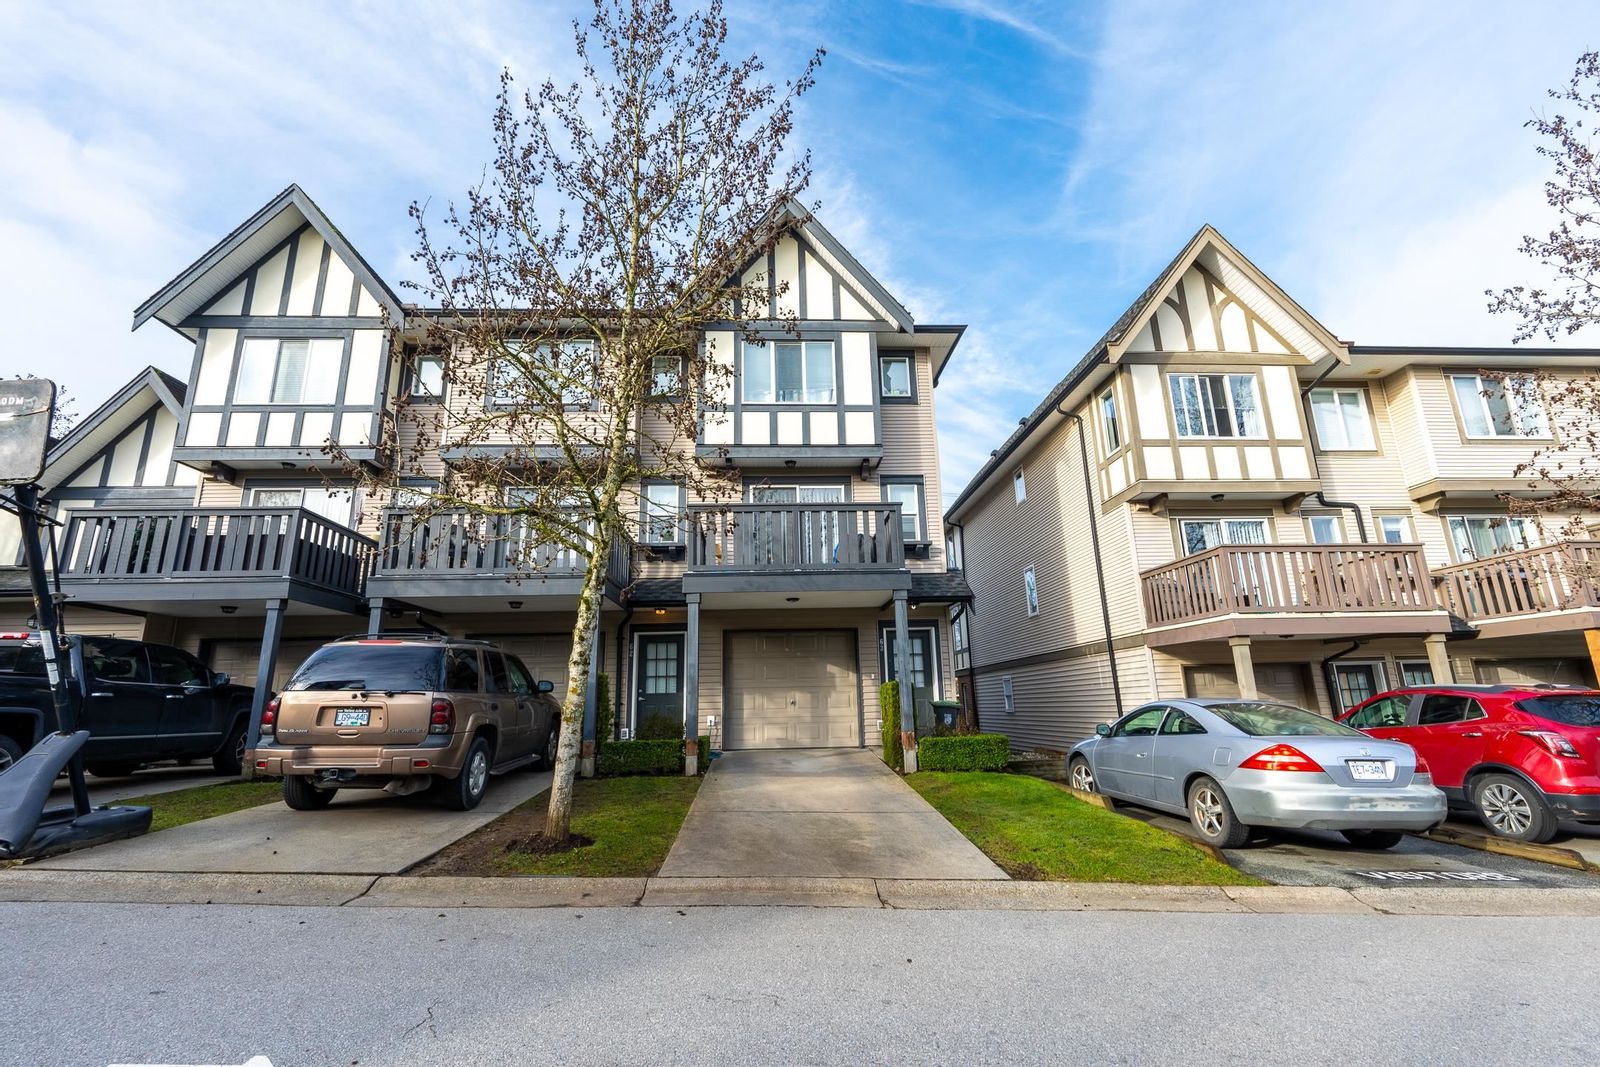 We have sold (bought) a property at 63 20875 80 AVENUE AVE in LANGLEY